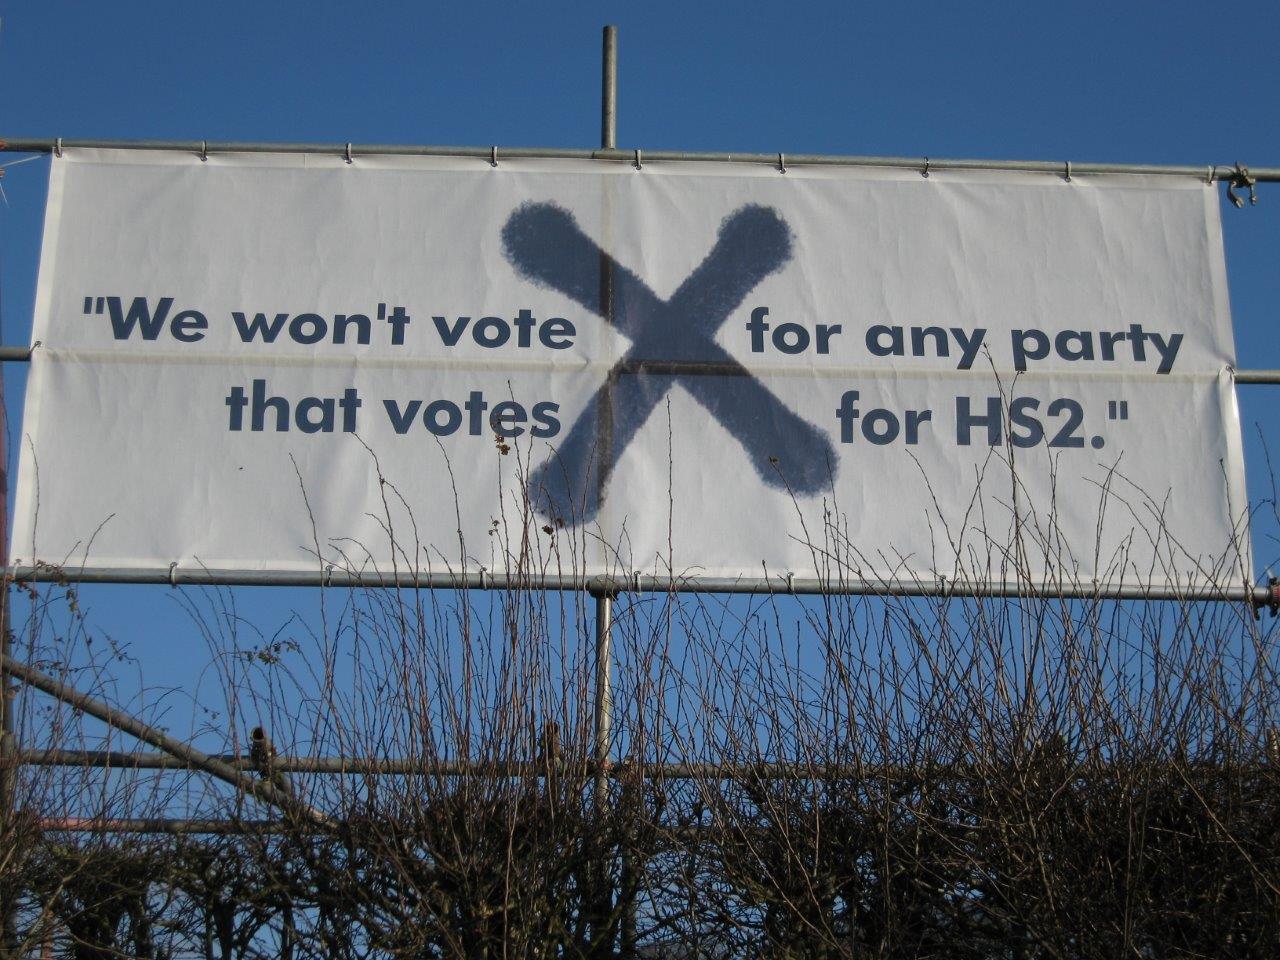 Banners like this have been up in the area around Chequers for a few years now.